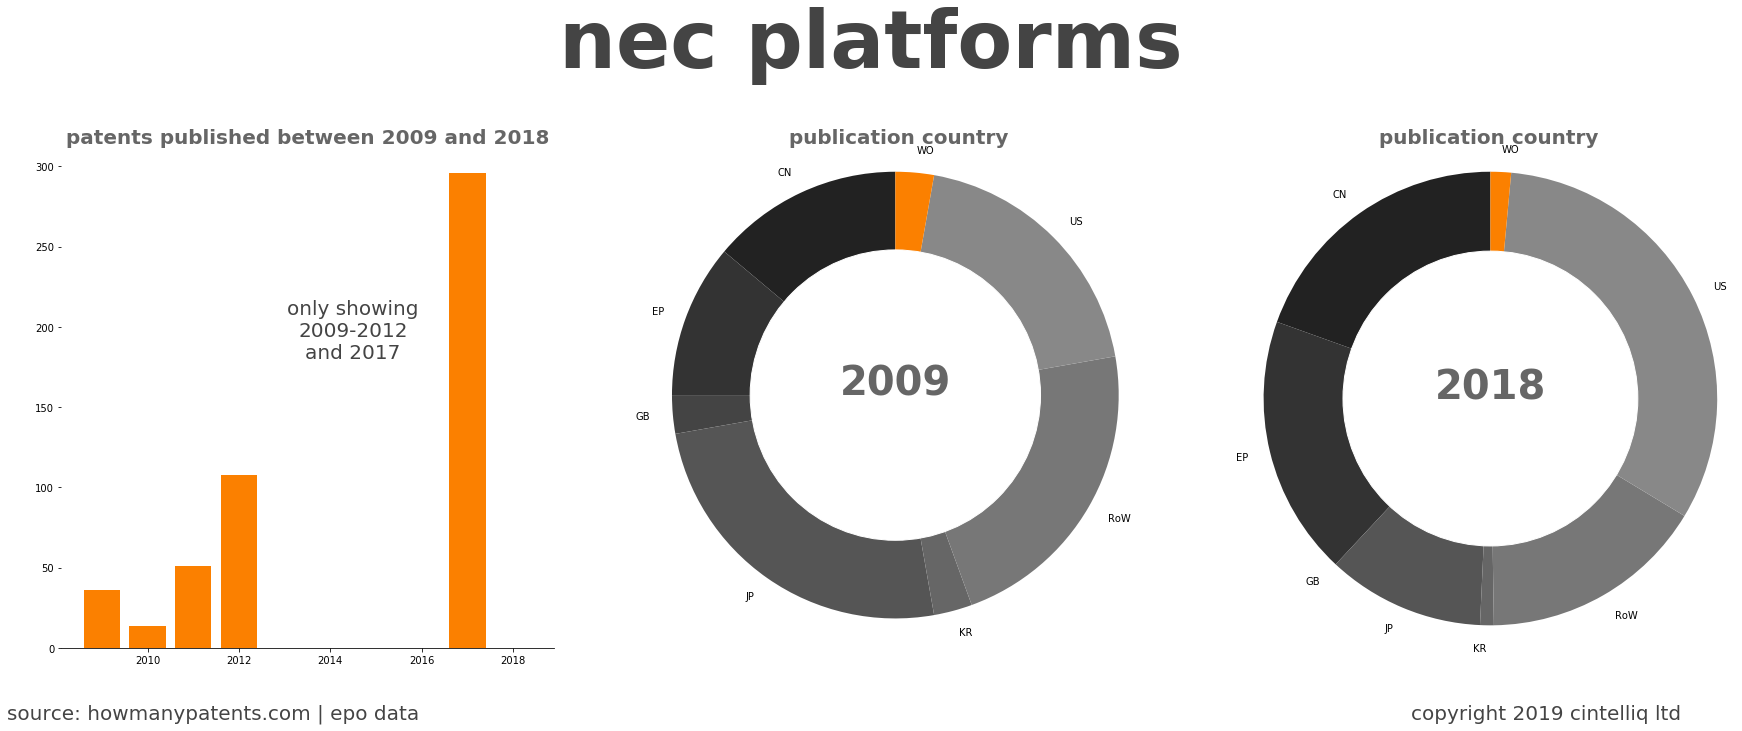 summary of patents for Nec Platforms